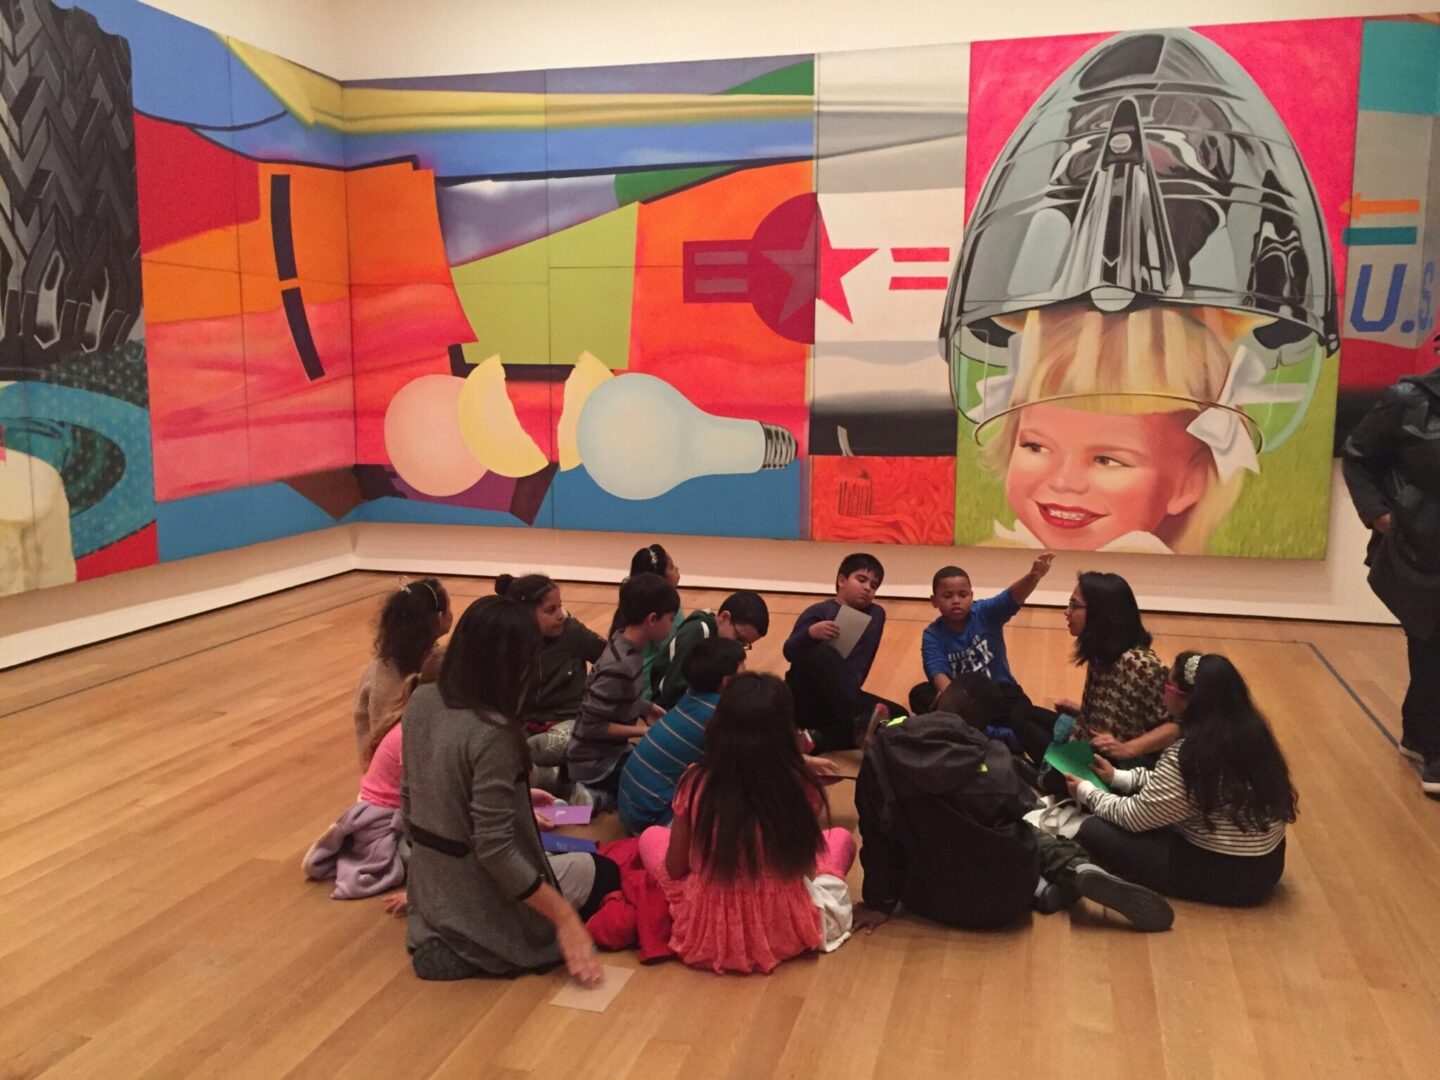 A group of children sitting on the floor in front of paintings.